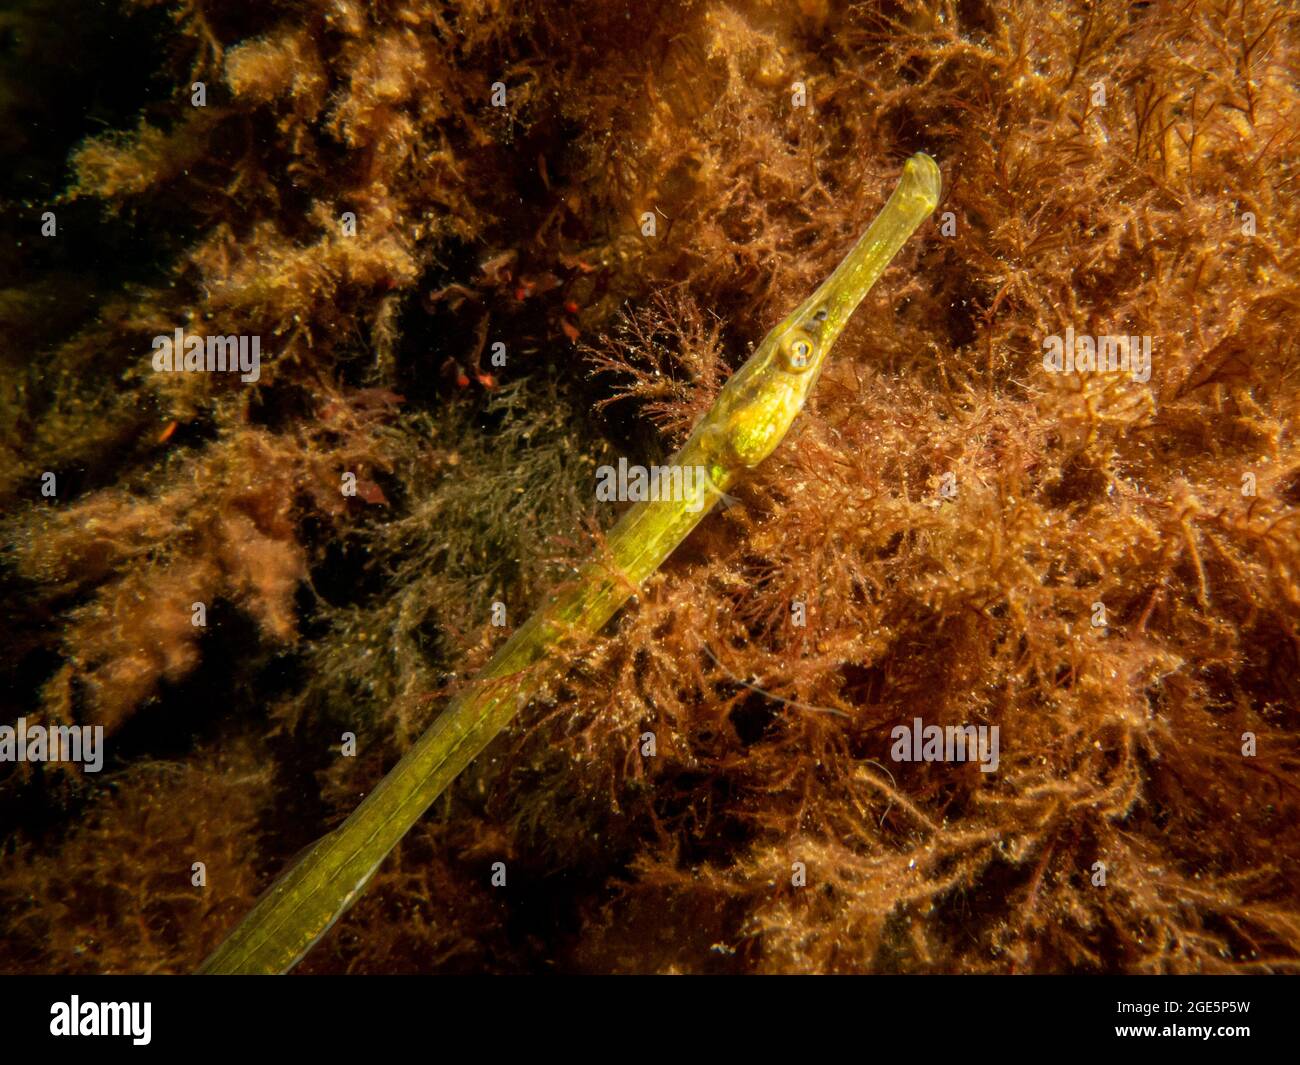 A close-up picture of a straightnose pipefish, Nerophis ophidion, among seaweed and stones. Picture from The Sound, between Sweden and Denmark Stock Photo